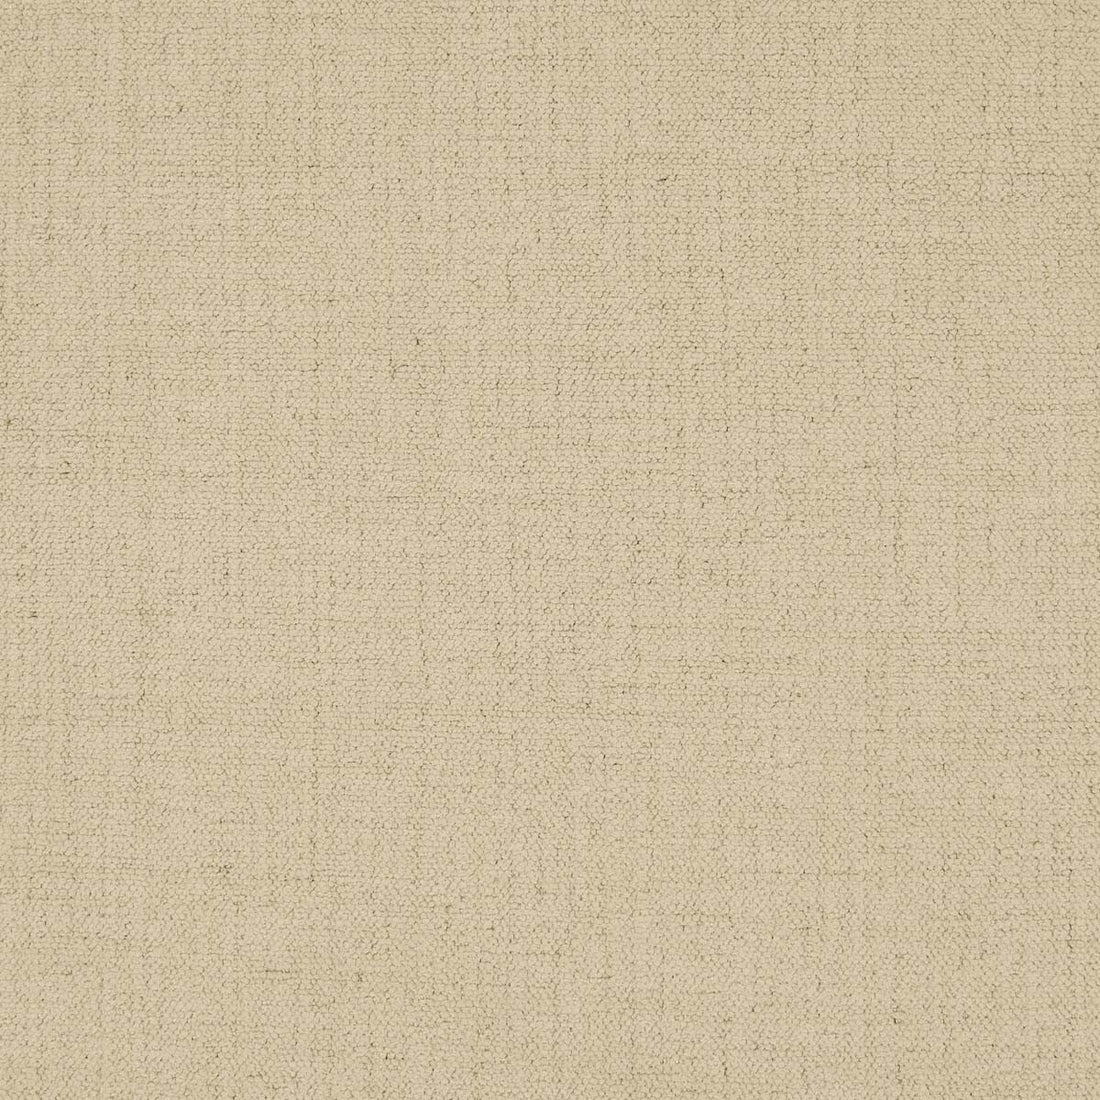 Materica fabric in 16 color - pattern LZ-30412.16.0 - by Kravet Couture in the Lizzo collection